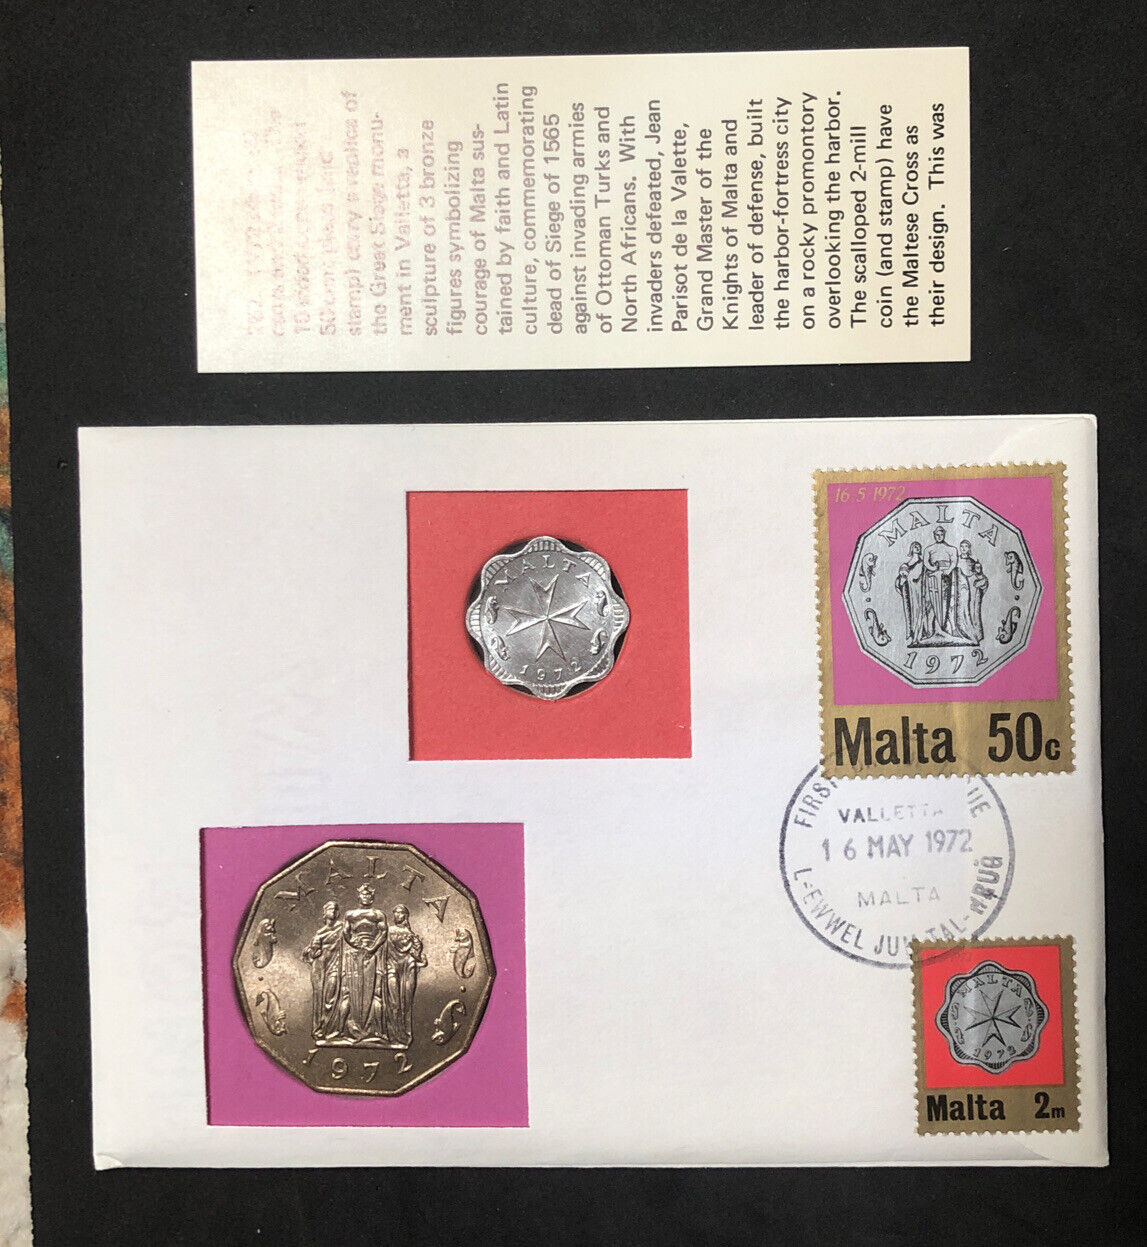 1972 #267 99 COMPANY FIRST DAY FIRST ISSUED MALTA 50 CENT & 2 MILLS WITH STAMPS